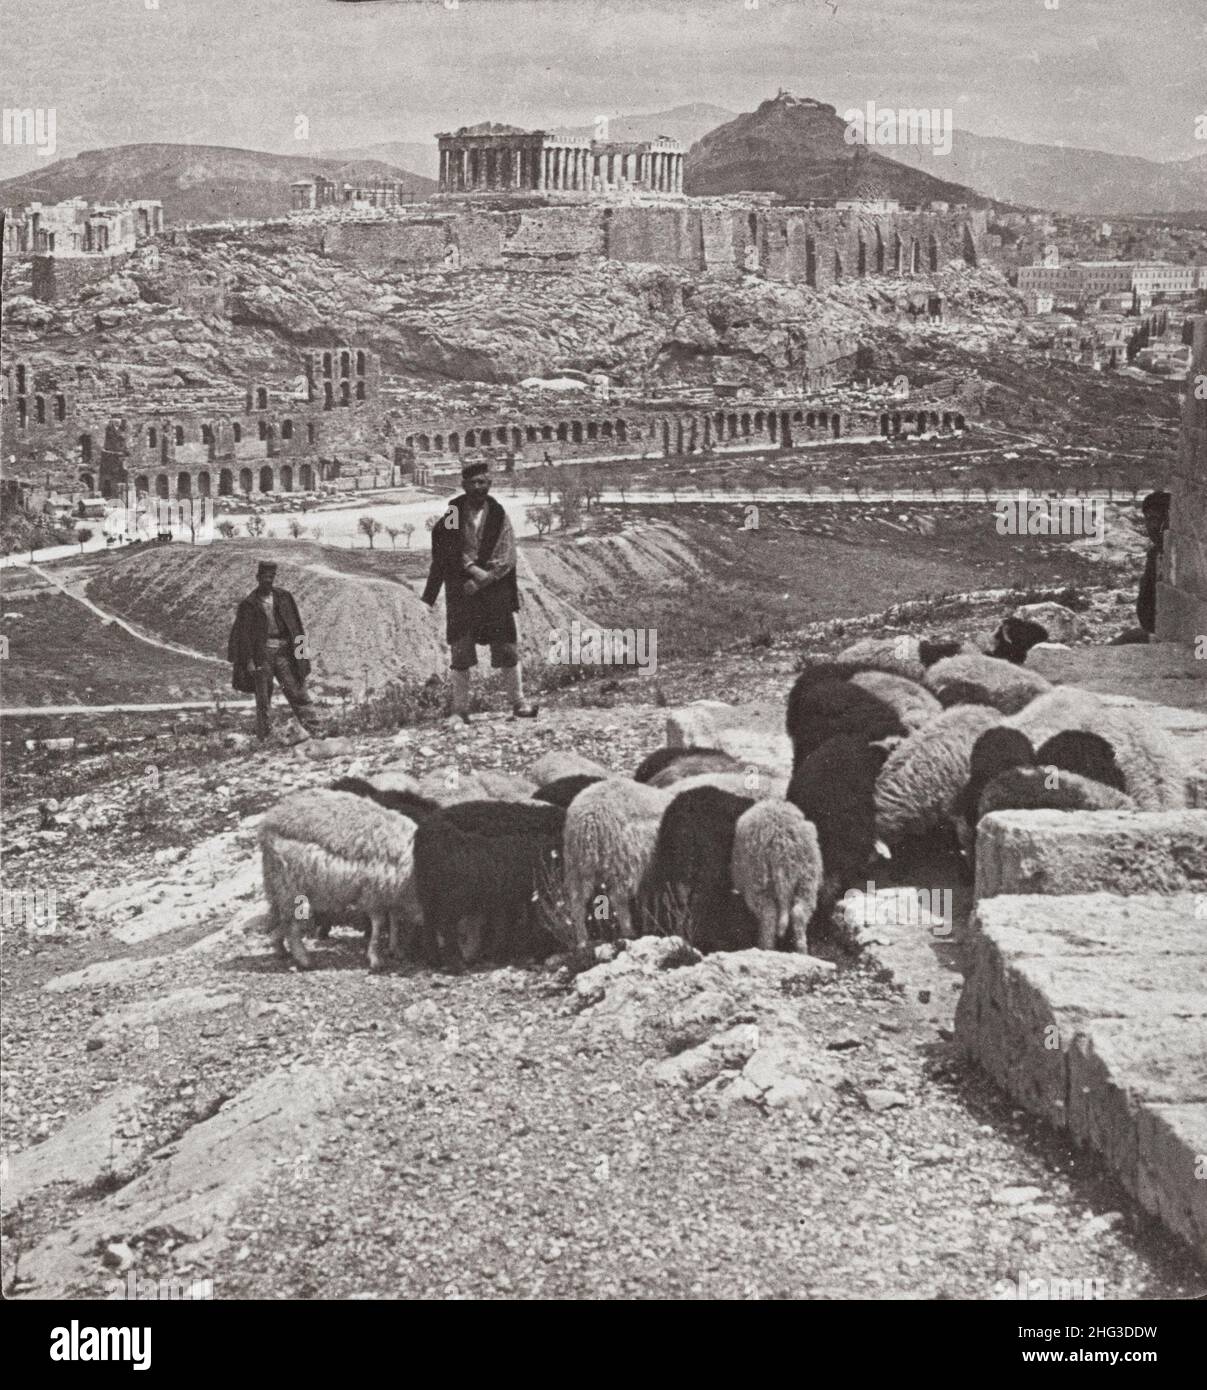 Vintage photo of the Acropolis and Lykabettos (royal palace at right), Athens, Greece. 1907 Photograph shows herd of sheep grazing and two men standin Stock Photo